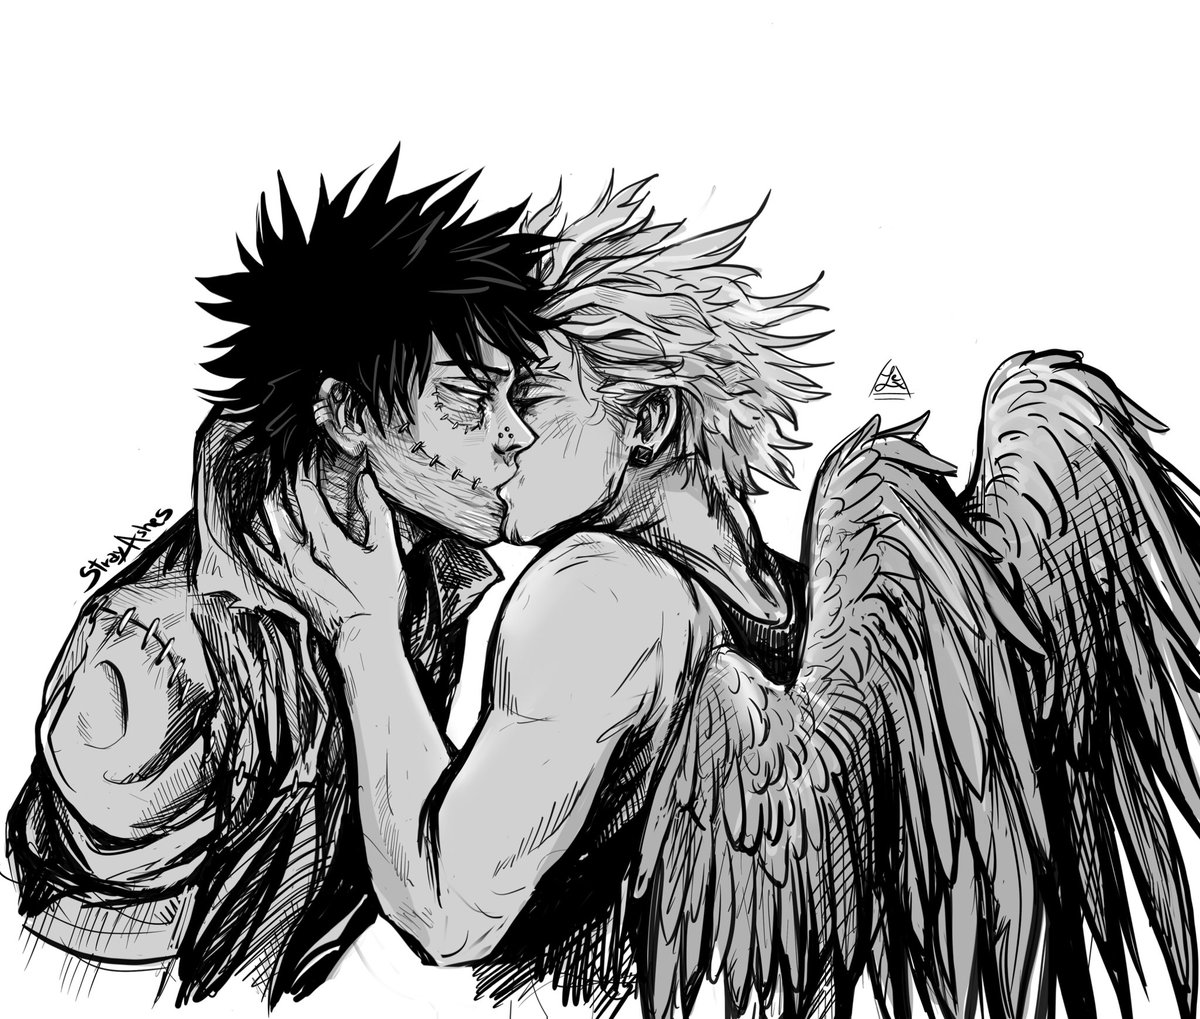 I’m goin back to work on the others now #dabihawks #commission.